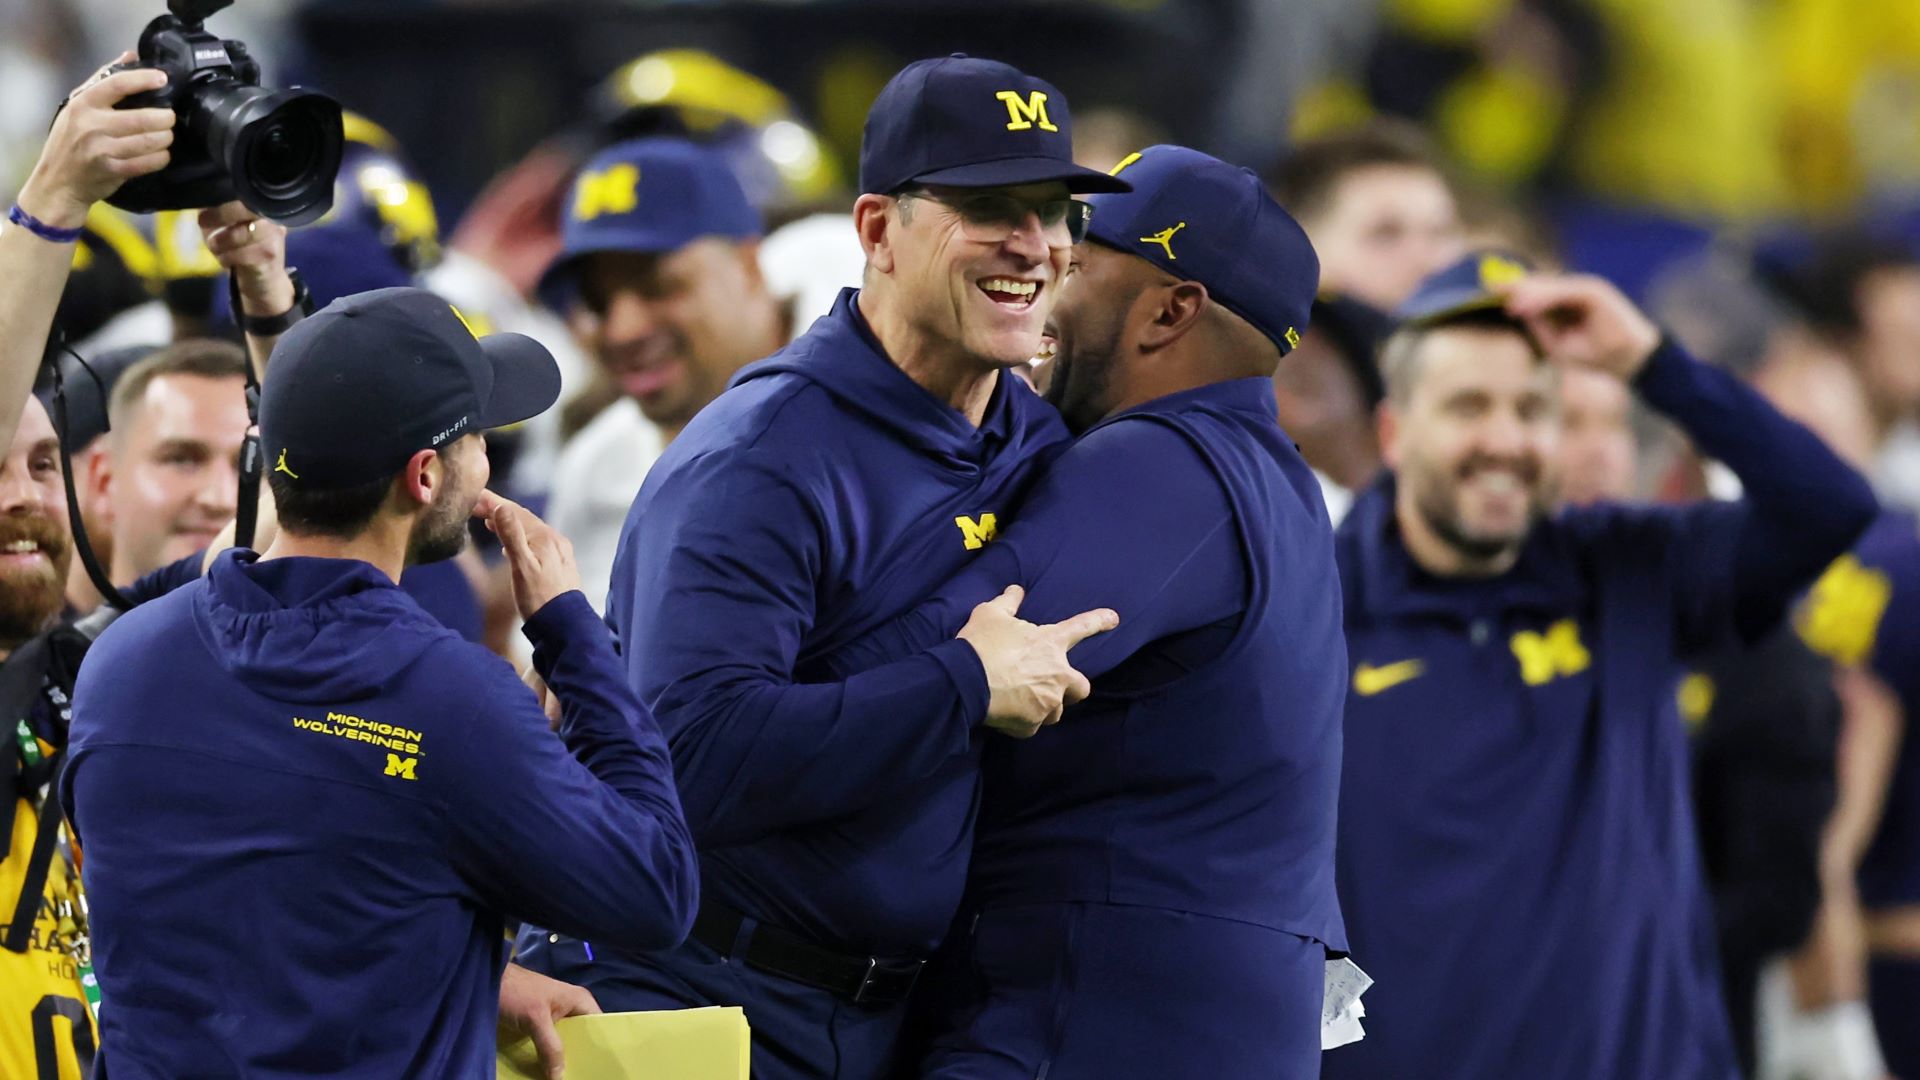 Jim Harbaugh Might’ve Revealed Future Plans After Michigan’s Title
Win